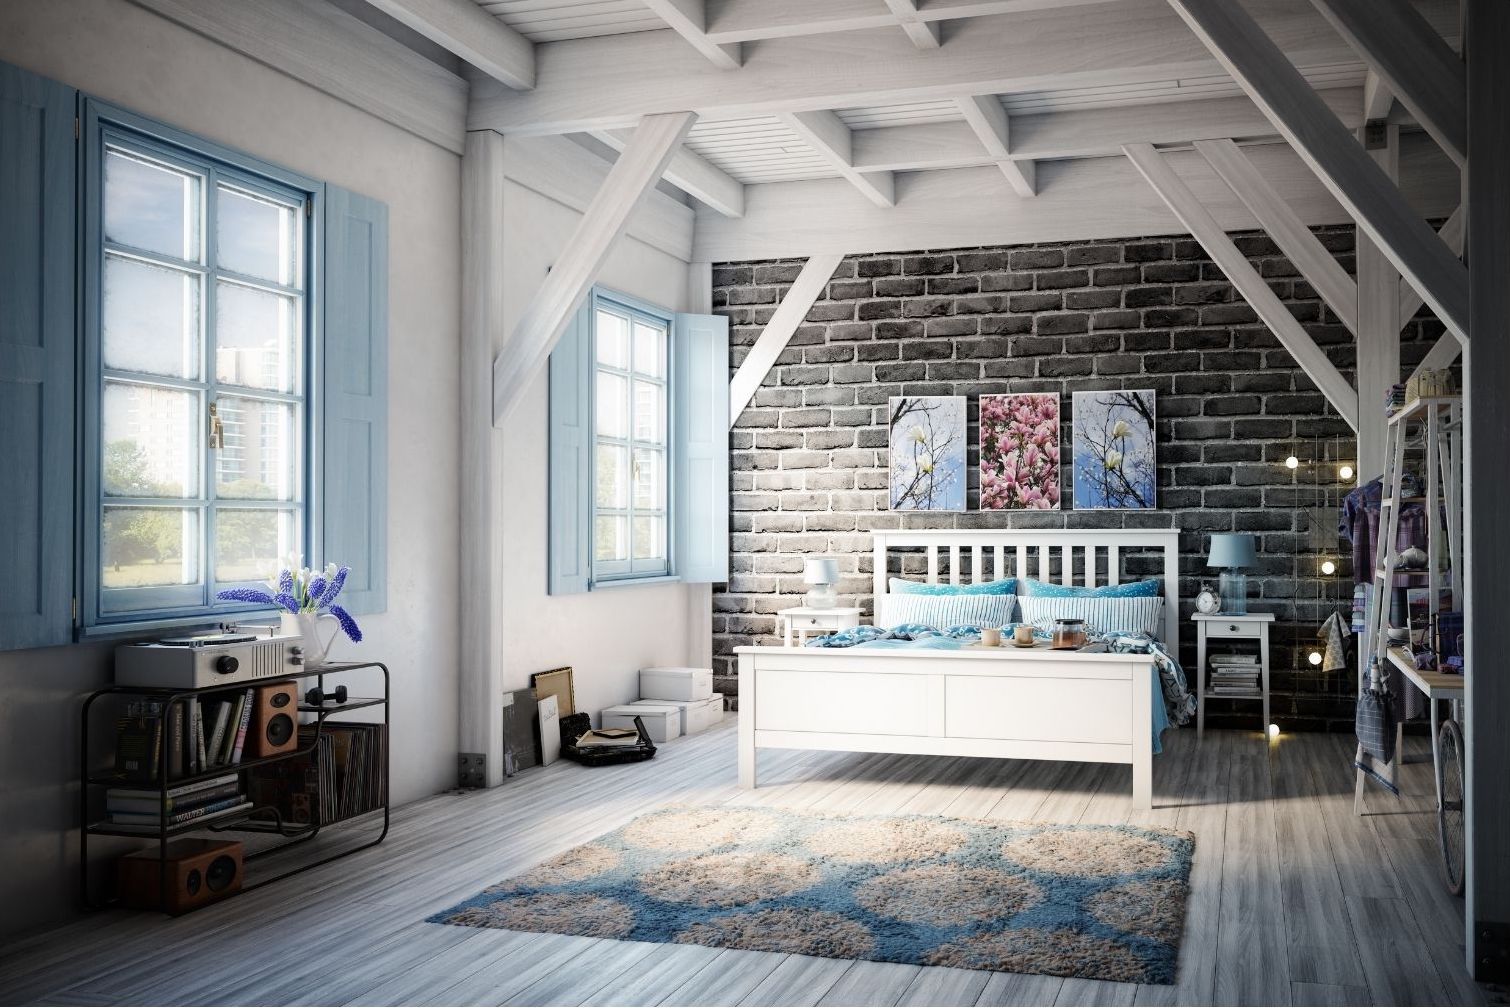 10 Ways To Decorate Modern Bedroom Rustic Style - The Handmade Store